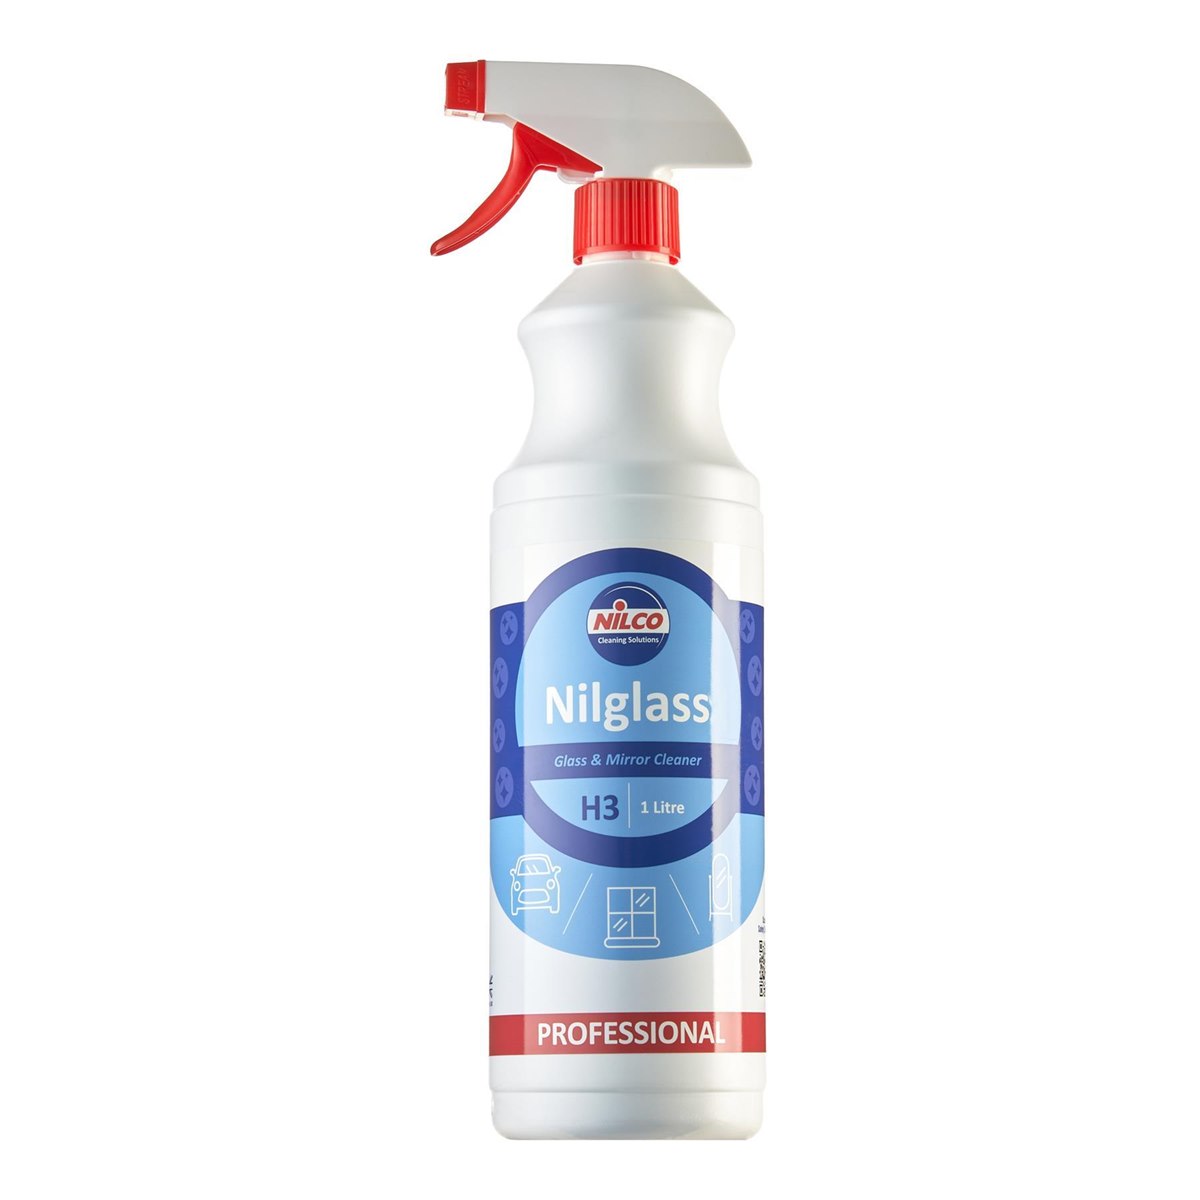 Nilglass Glass and Mirror Cleaner H3 Spray